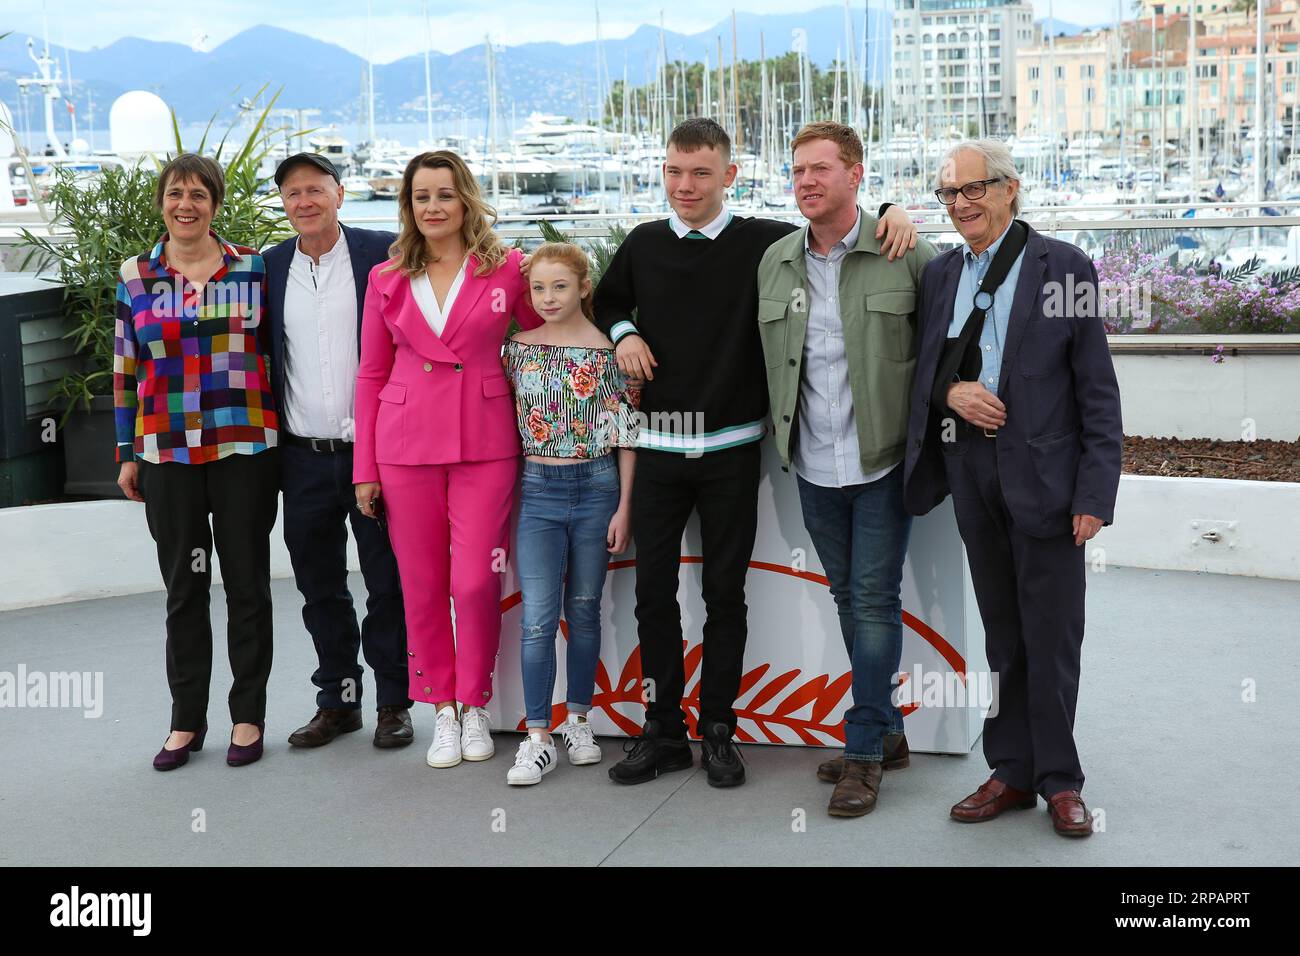 (190517) -- CANNES, May 17, 2019 (Xinhua) -- (L-R) Rebecca O Brien, Paul Laverty, Debbie Honeywood, Katie Proctor, Rhys Stone, Kris Hitchen and director Ken Loach pose during a photocall for the film Sorry We Missed You at the 72nd Cannes Film Festival in Cannes, France, May 17, 2019. British director Ken Loach s film Sorry We Missed You will compete for the Palme d Or with other 20 feature films during the 72nd Cannes Film Festival which is held from May 14 to 25. (Xinhua/Zhang Cheng) FRANCE-CANNES-72ND FILM FESTIVAL-SORRY WE MISSED YOU PUBLICATIONxNOTxINxCHN Stock Photo